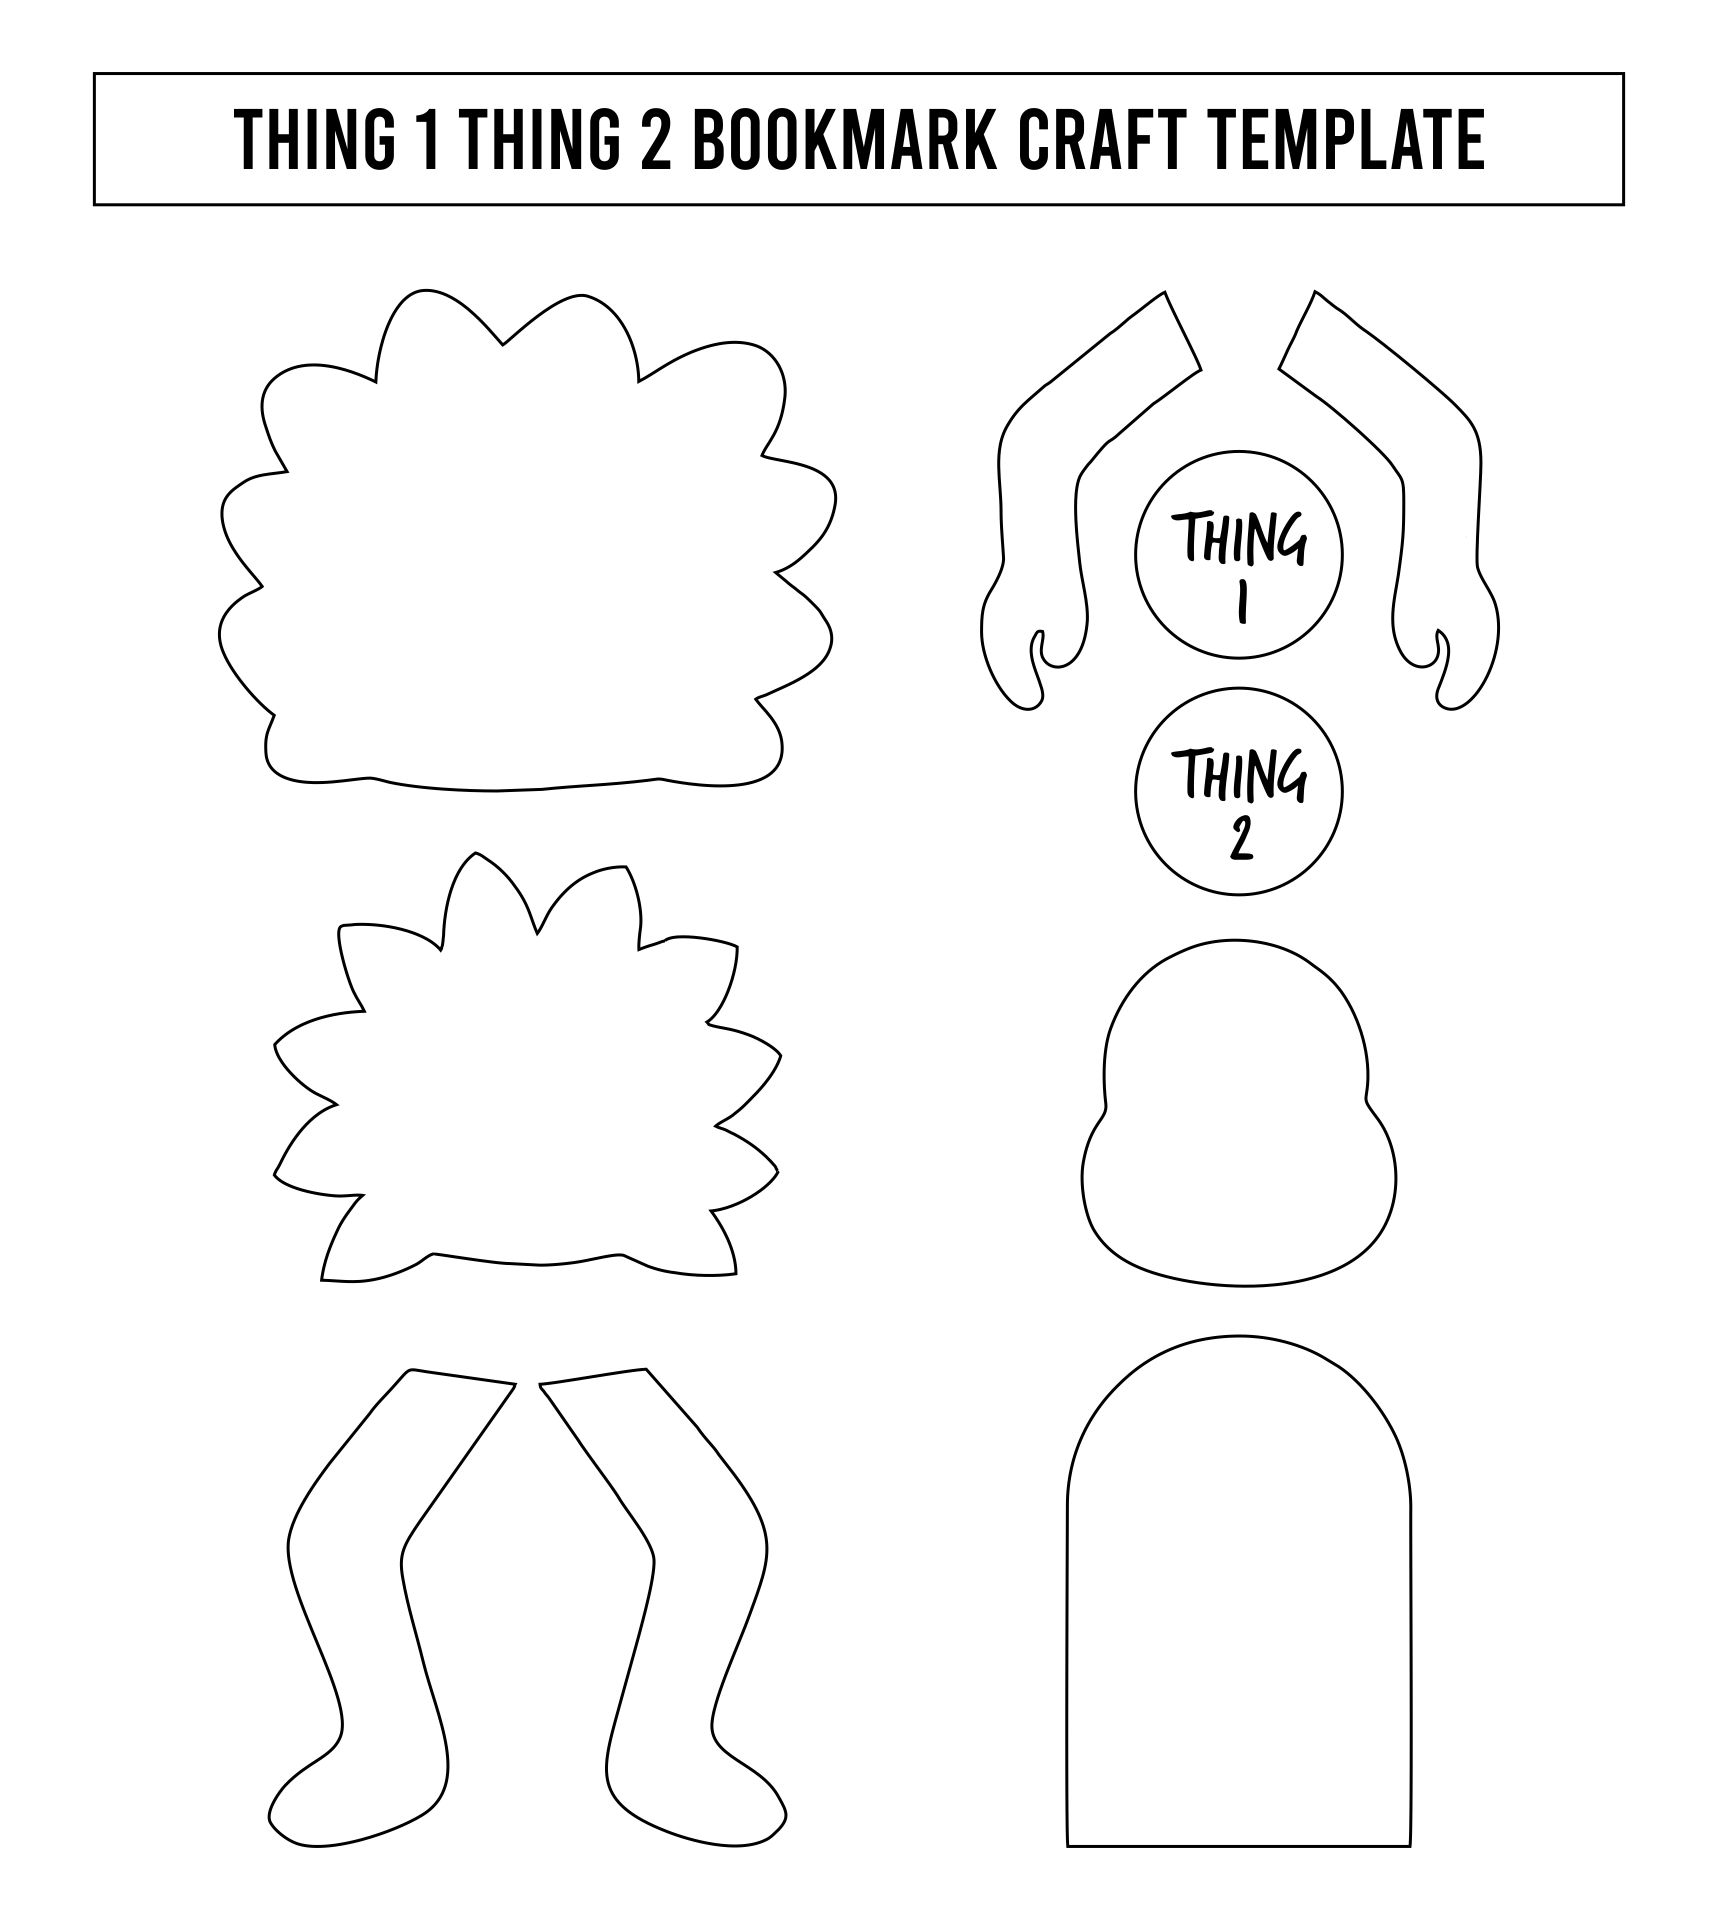 Printable Thing 1 Thing 2 Bookmark Craft Template